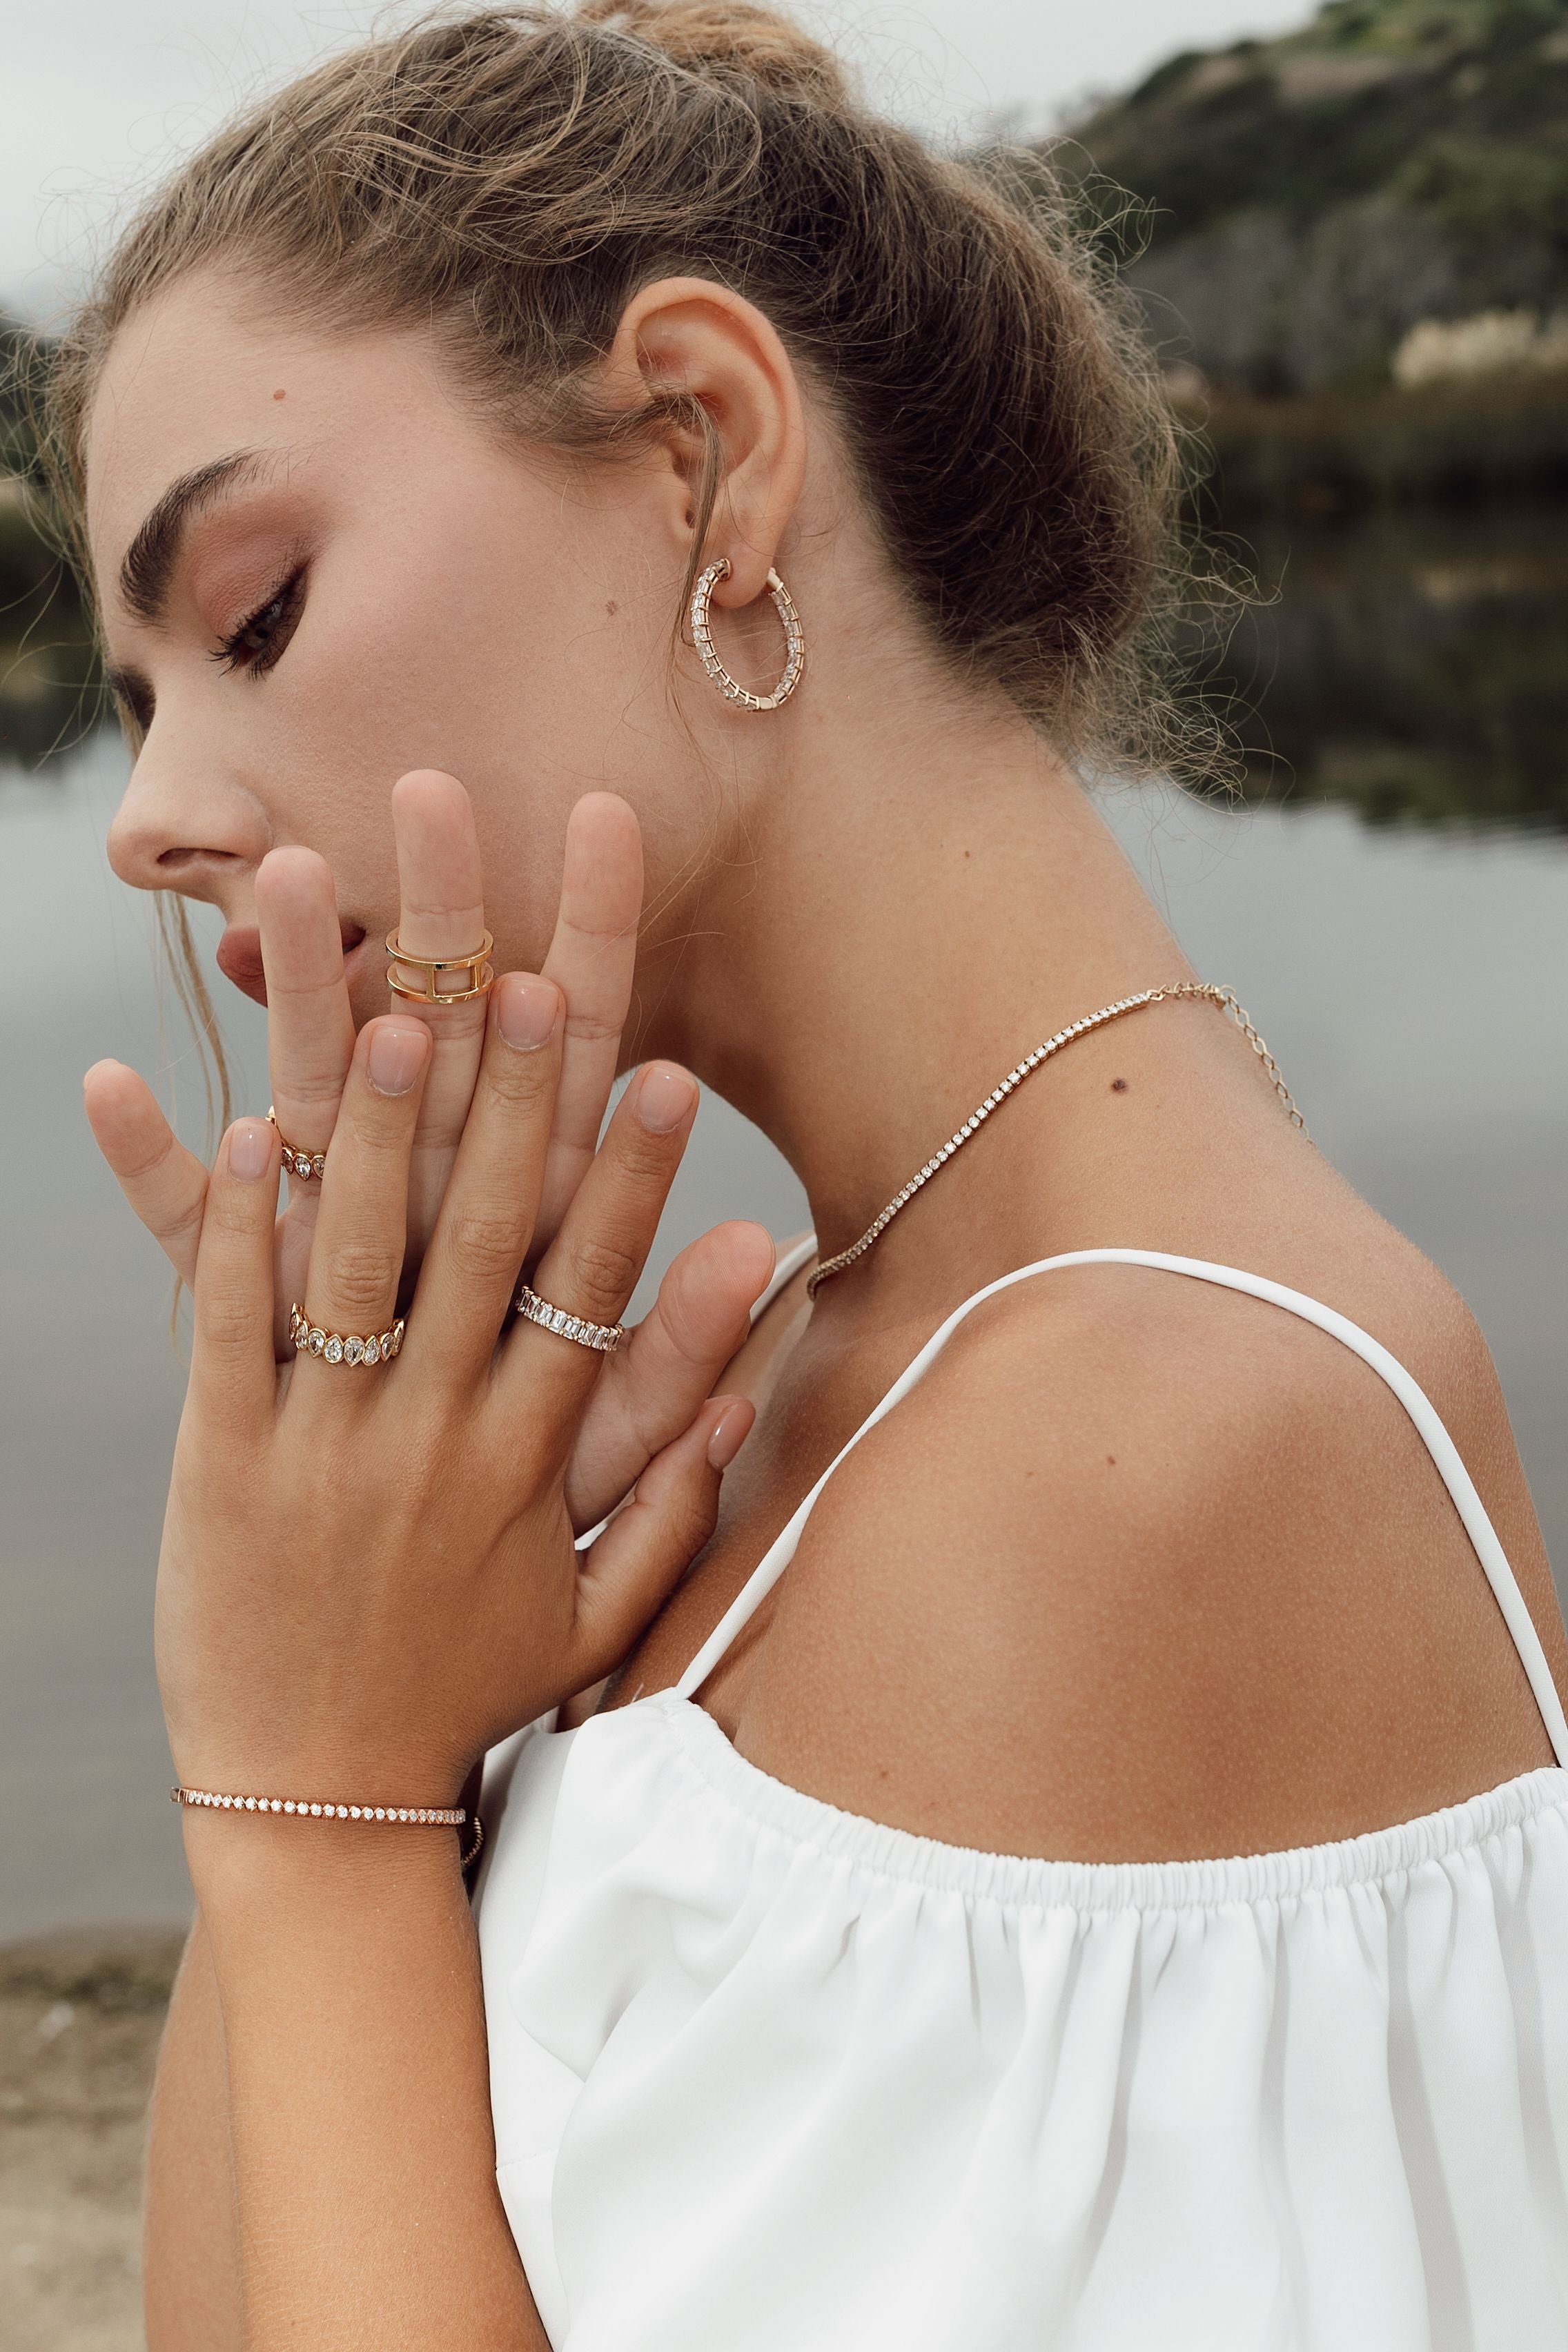 Turn your jewelry dreams into sparkling reality